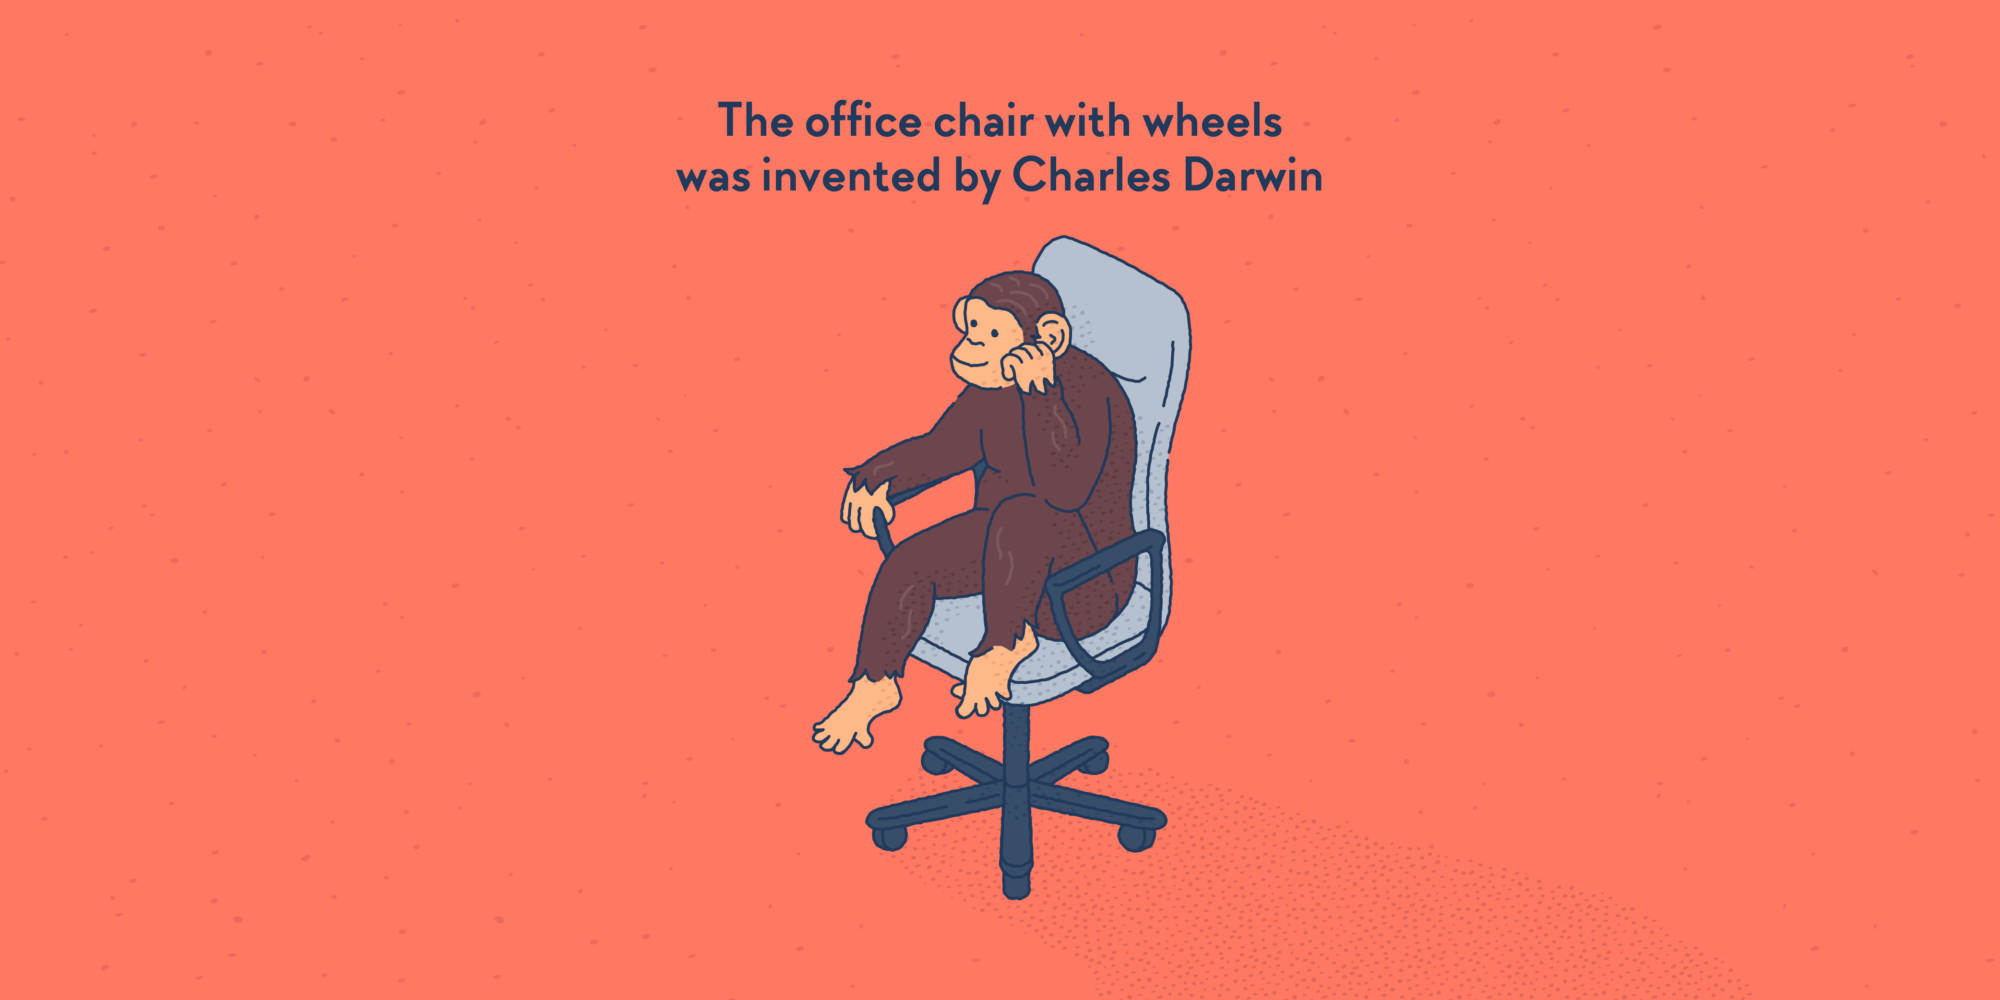 A mordern office chair, on which is sitting a chimpanzee.